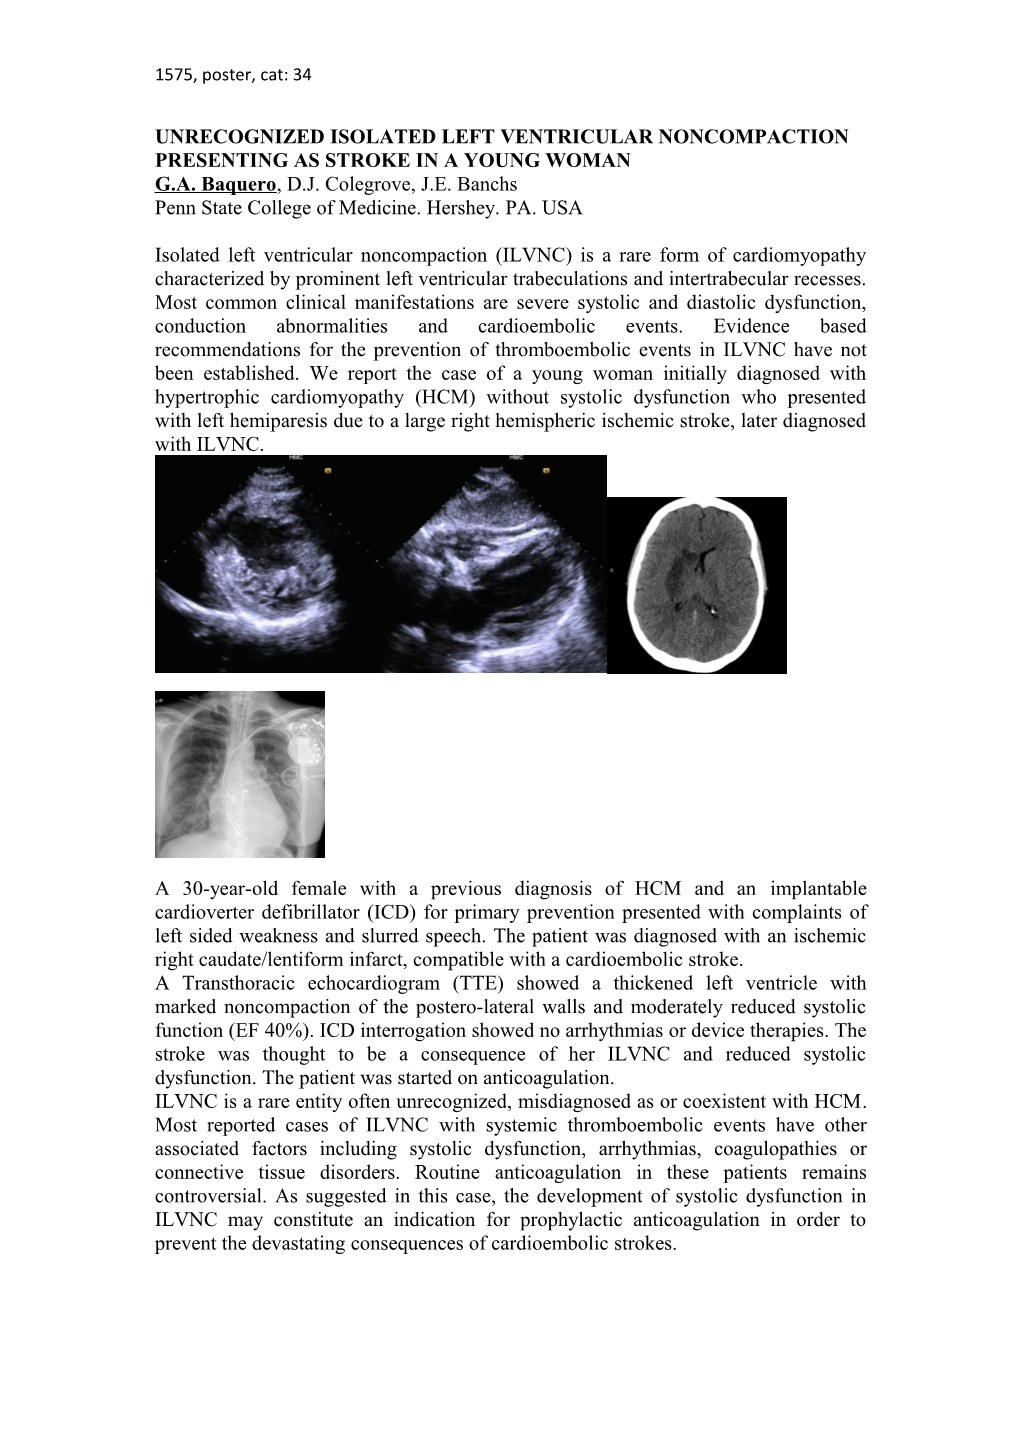 Unrecognized Isolated Left Ventricular Noncompaction Presenting As Stroke in a Young Woman